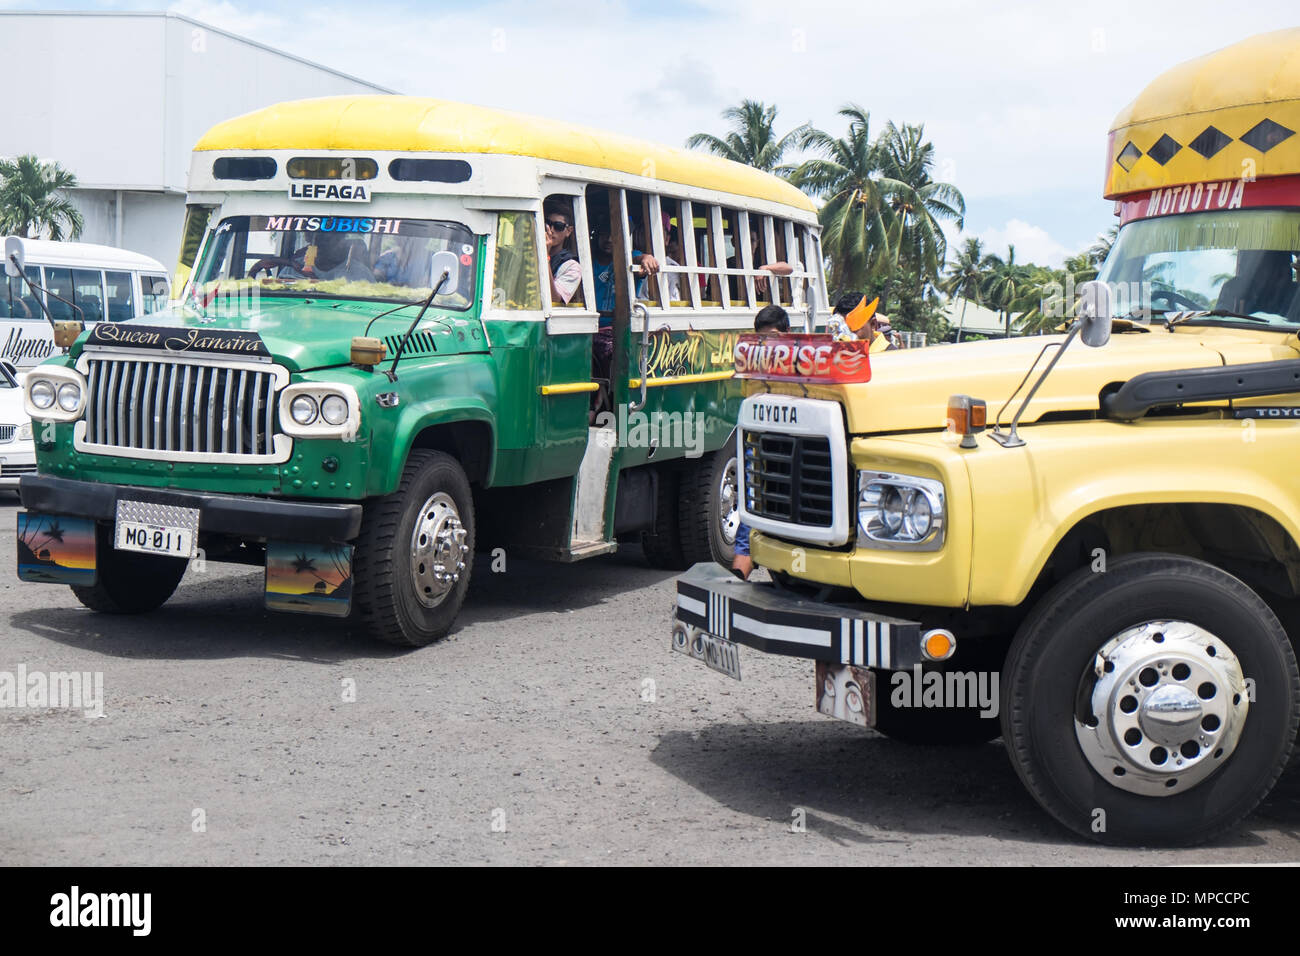 Apia, Samoa - October 30, 2017: People on a colorful vintage bus at Apia bus station on Upolu Island Stock Photo